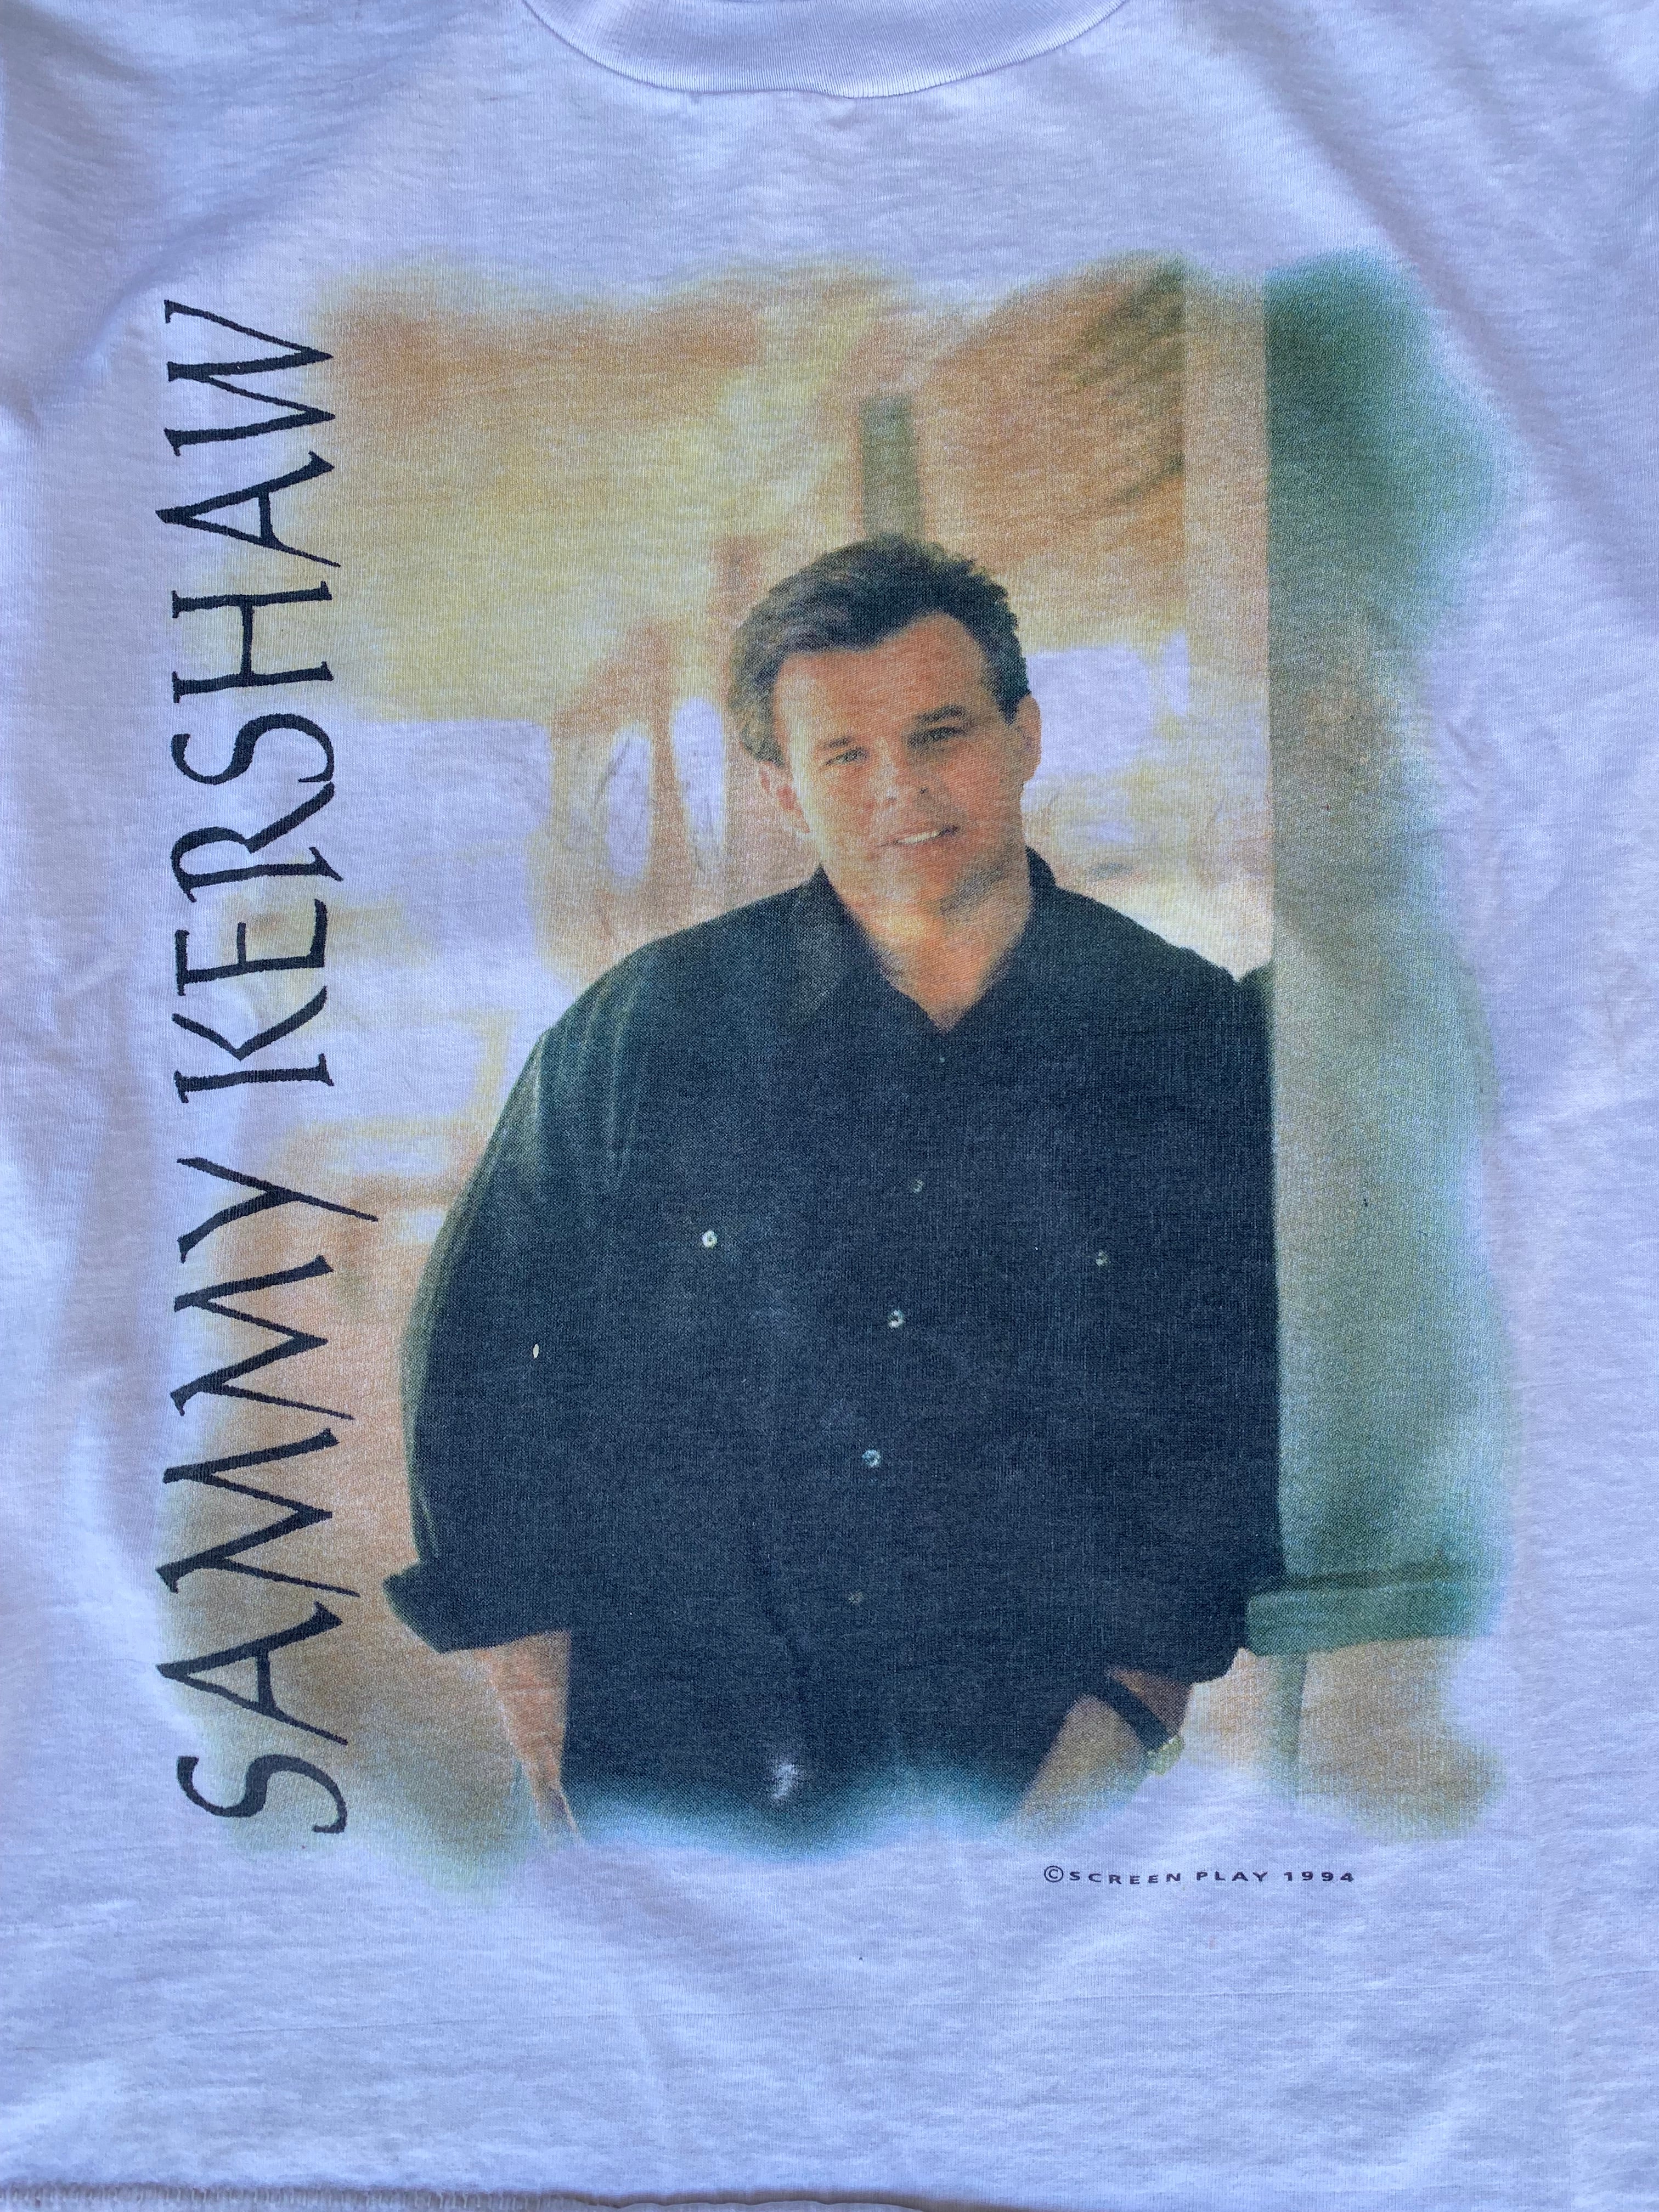 1996 Sammy Kershaw "National Working Woman's Holiday" T-Shirt (L)